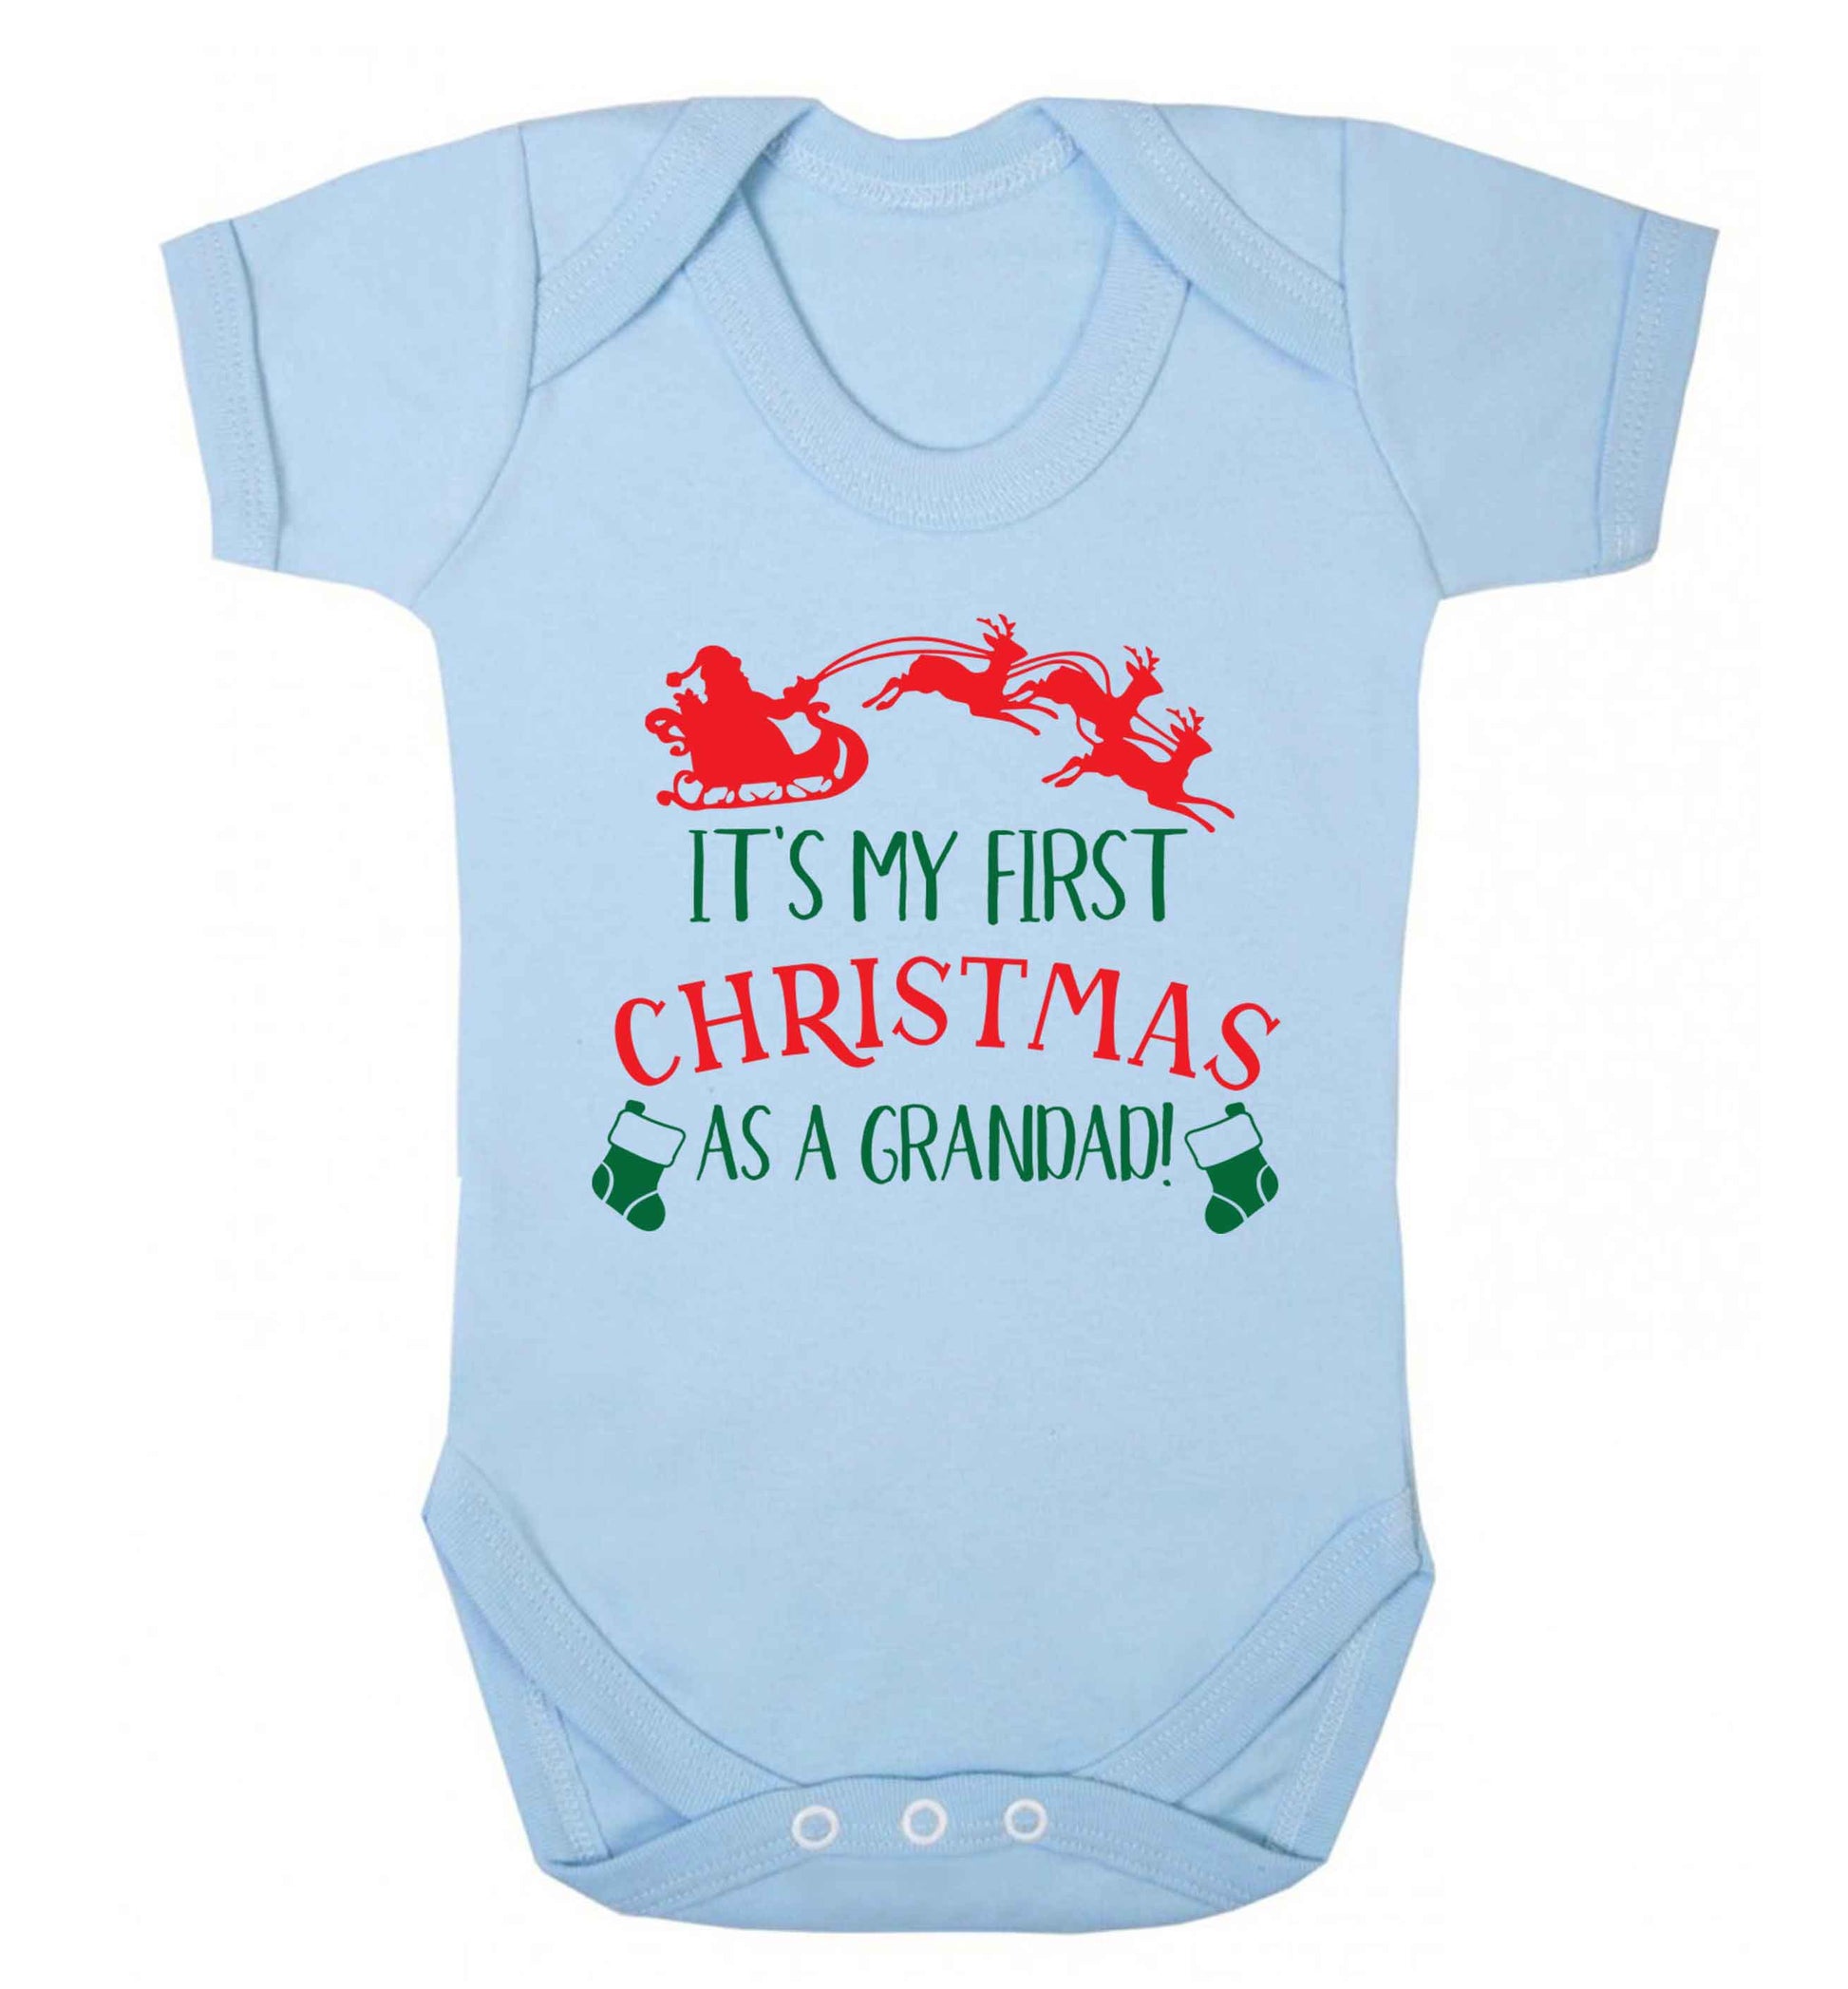 It's my first Christmas as a grandad! Baby Vest pale blue 18-24 months